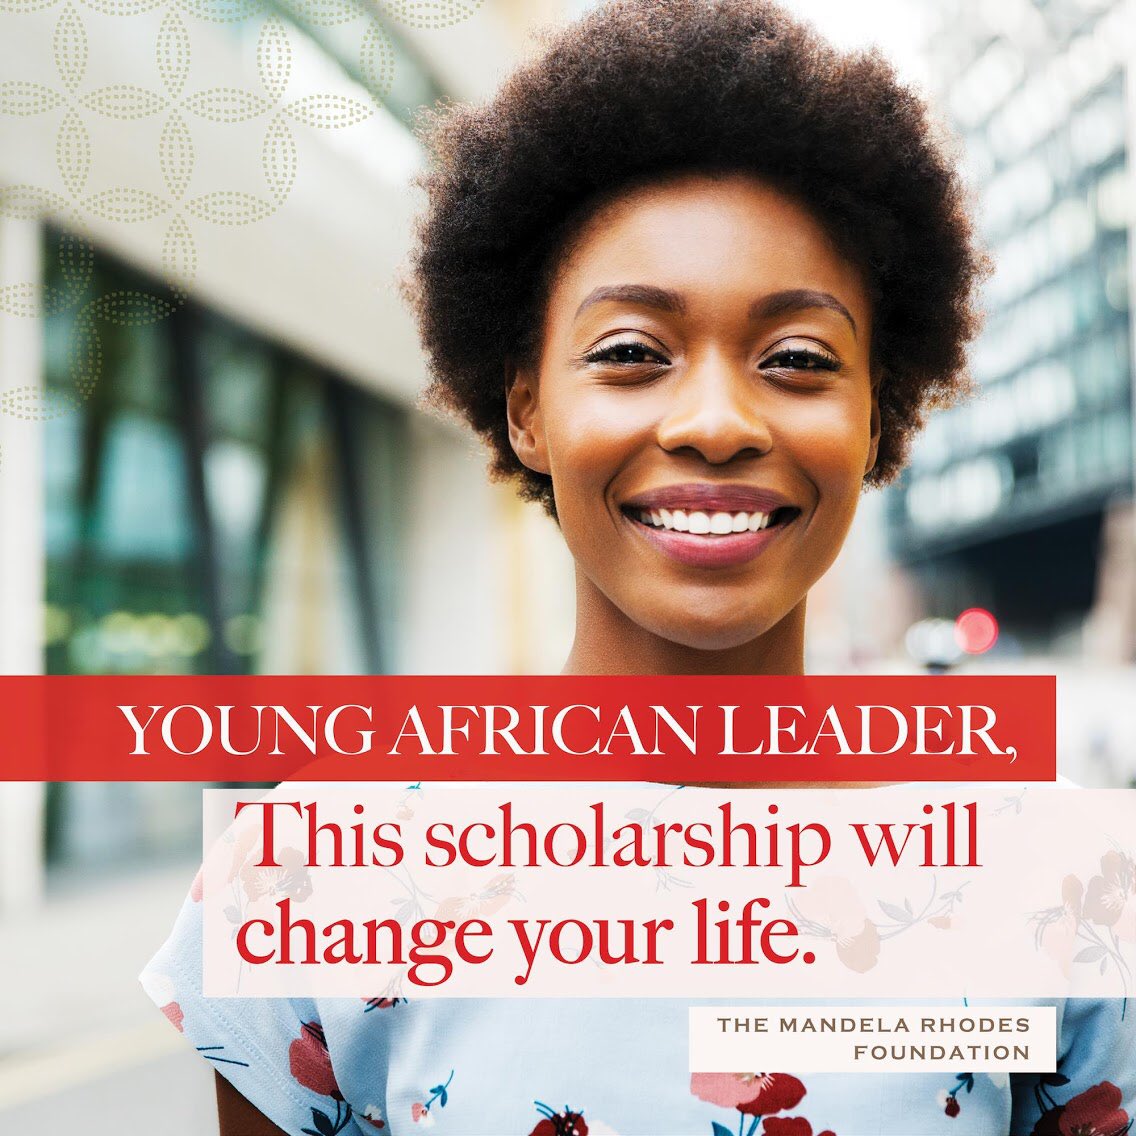 Mandela Rhodes Postgraduate Scholarships 2019/2020 for young Africans to study in South Africa (Completely Moneyed)